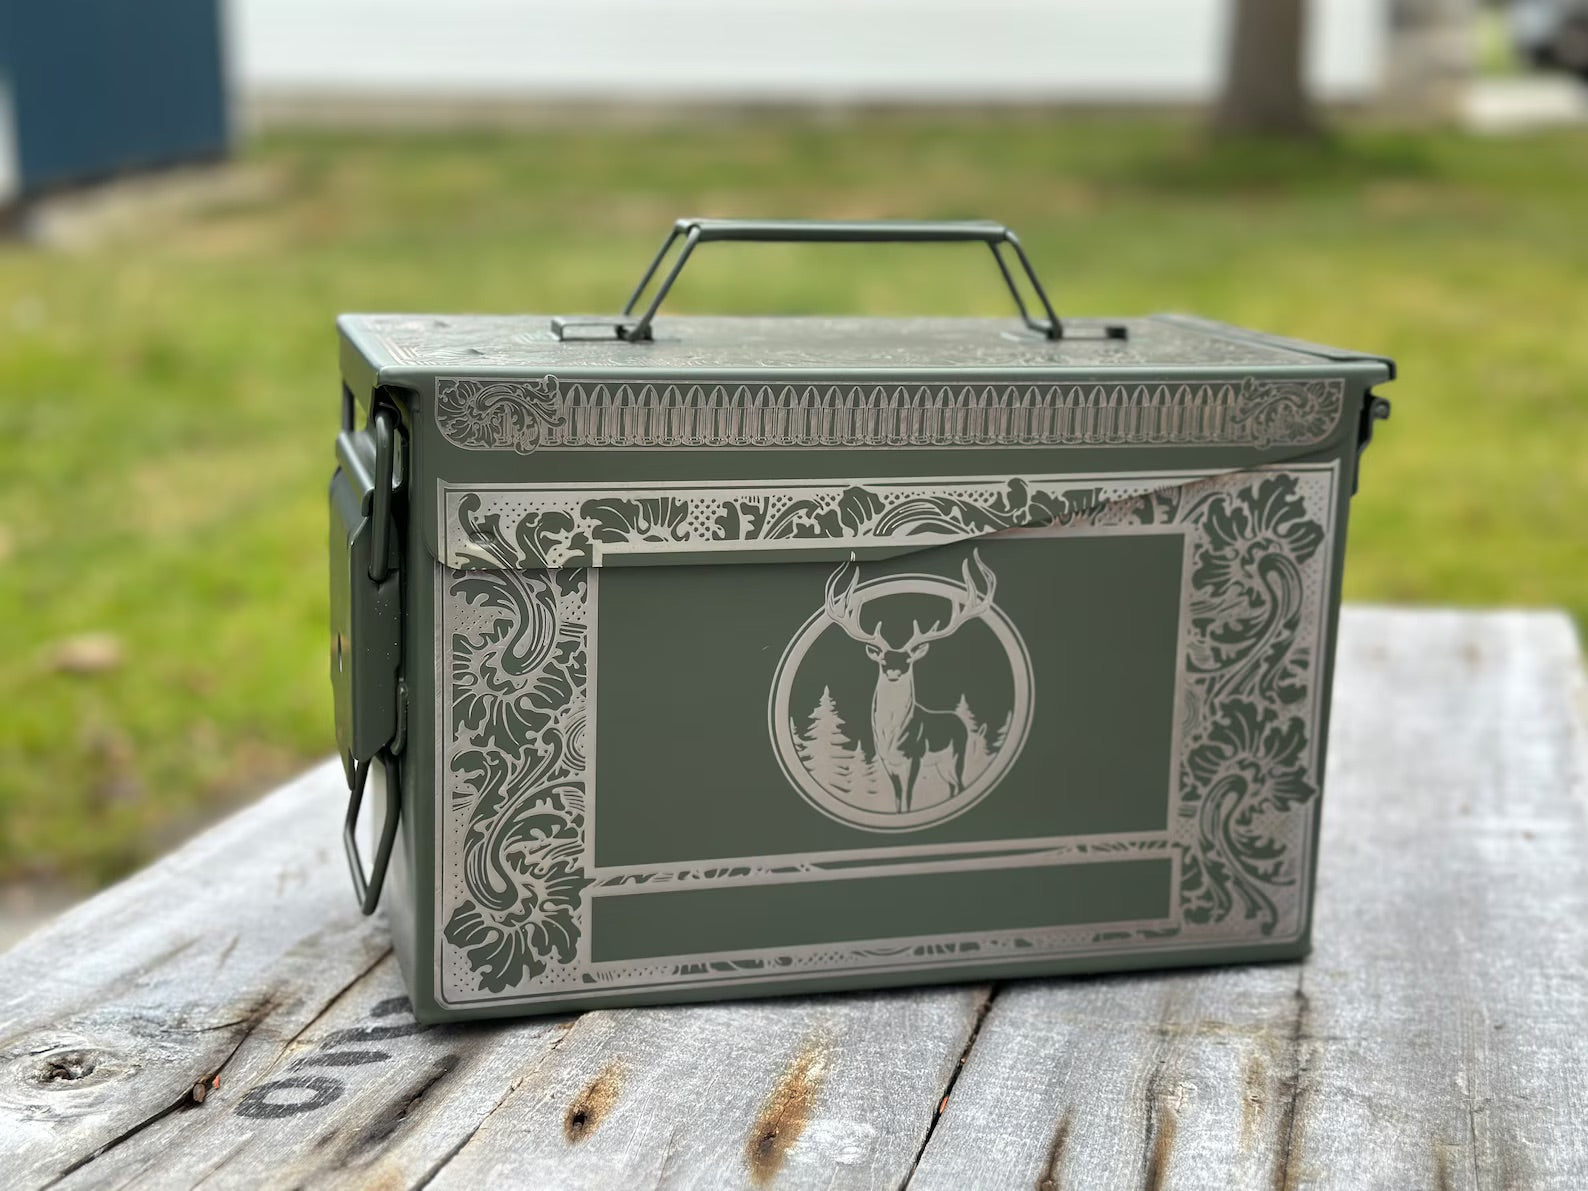 Ultimate Deer Hunter's Rack - Customized 50 cal ammo can laser engraved on all sides - 0